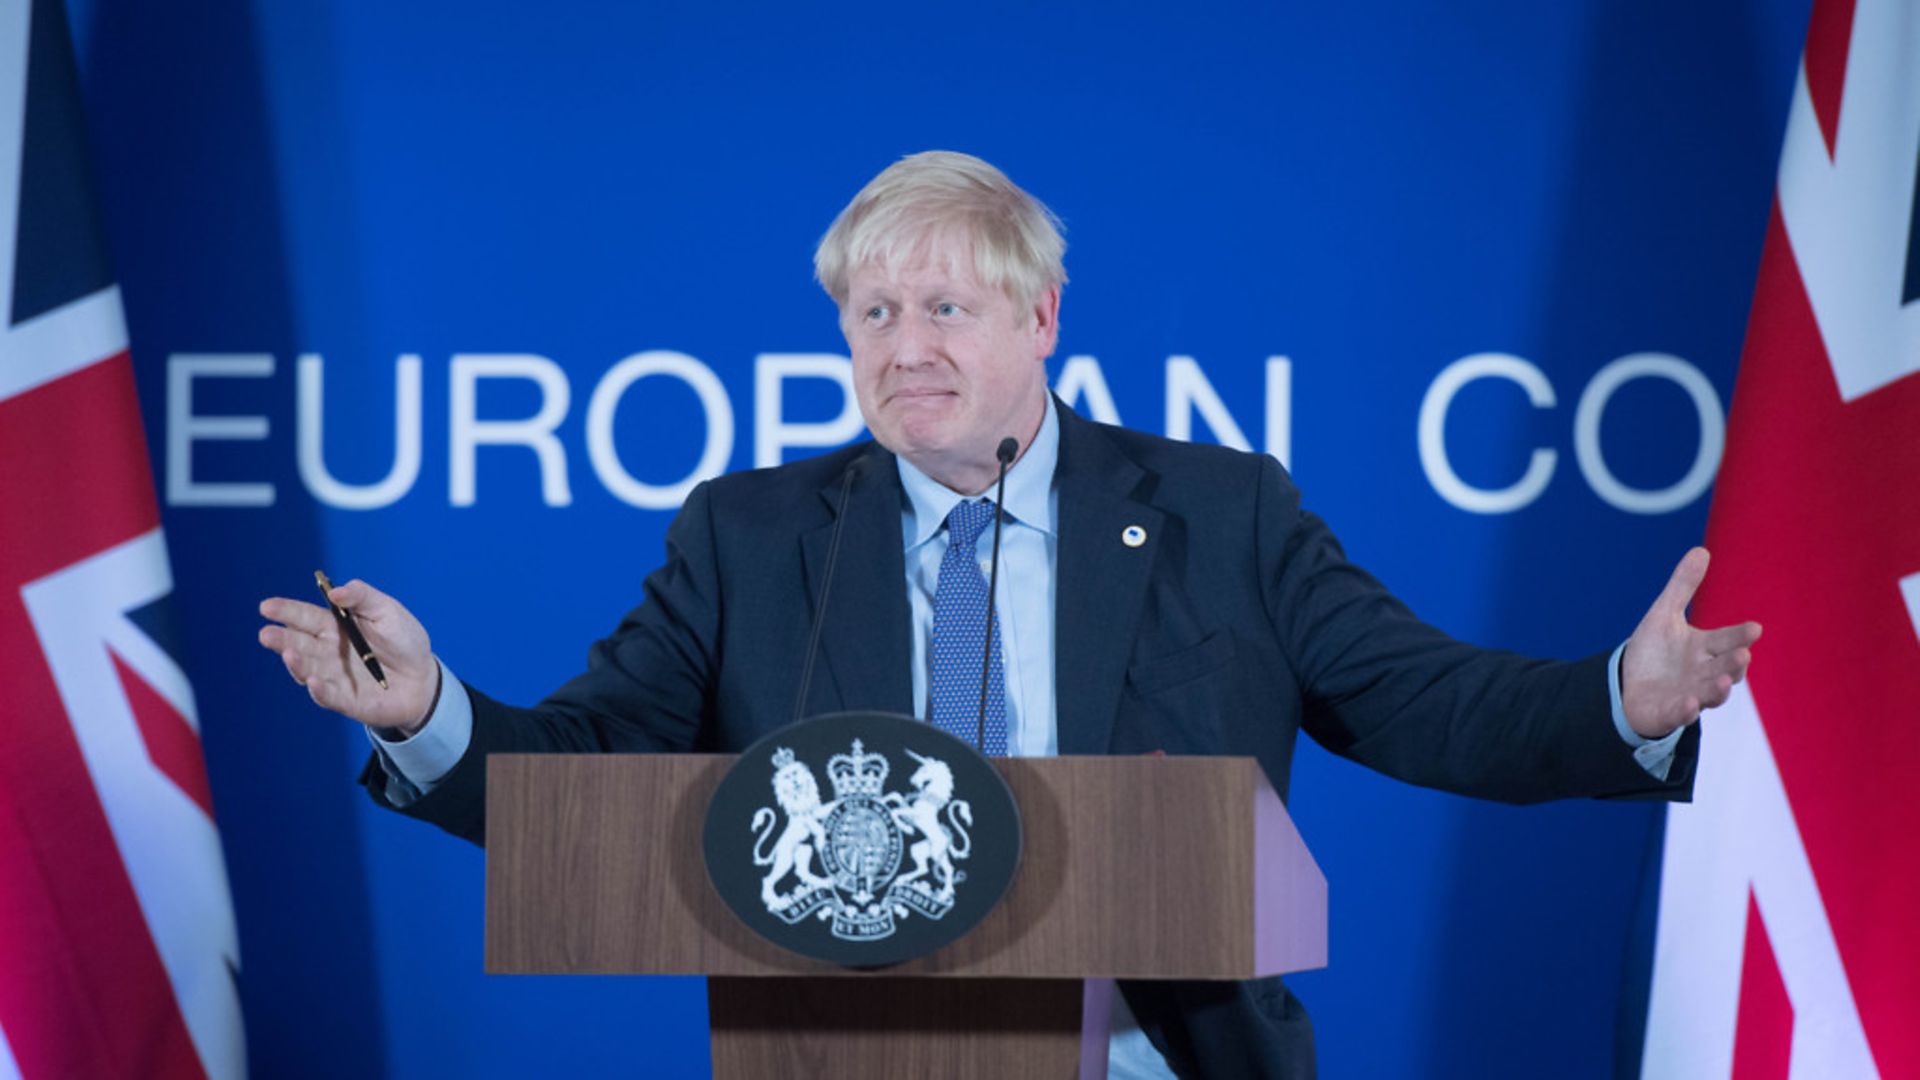 Boris Johnson speaking at a European Council summit at EU headquarters in Brussels. - Credit: PA